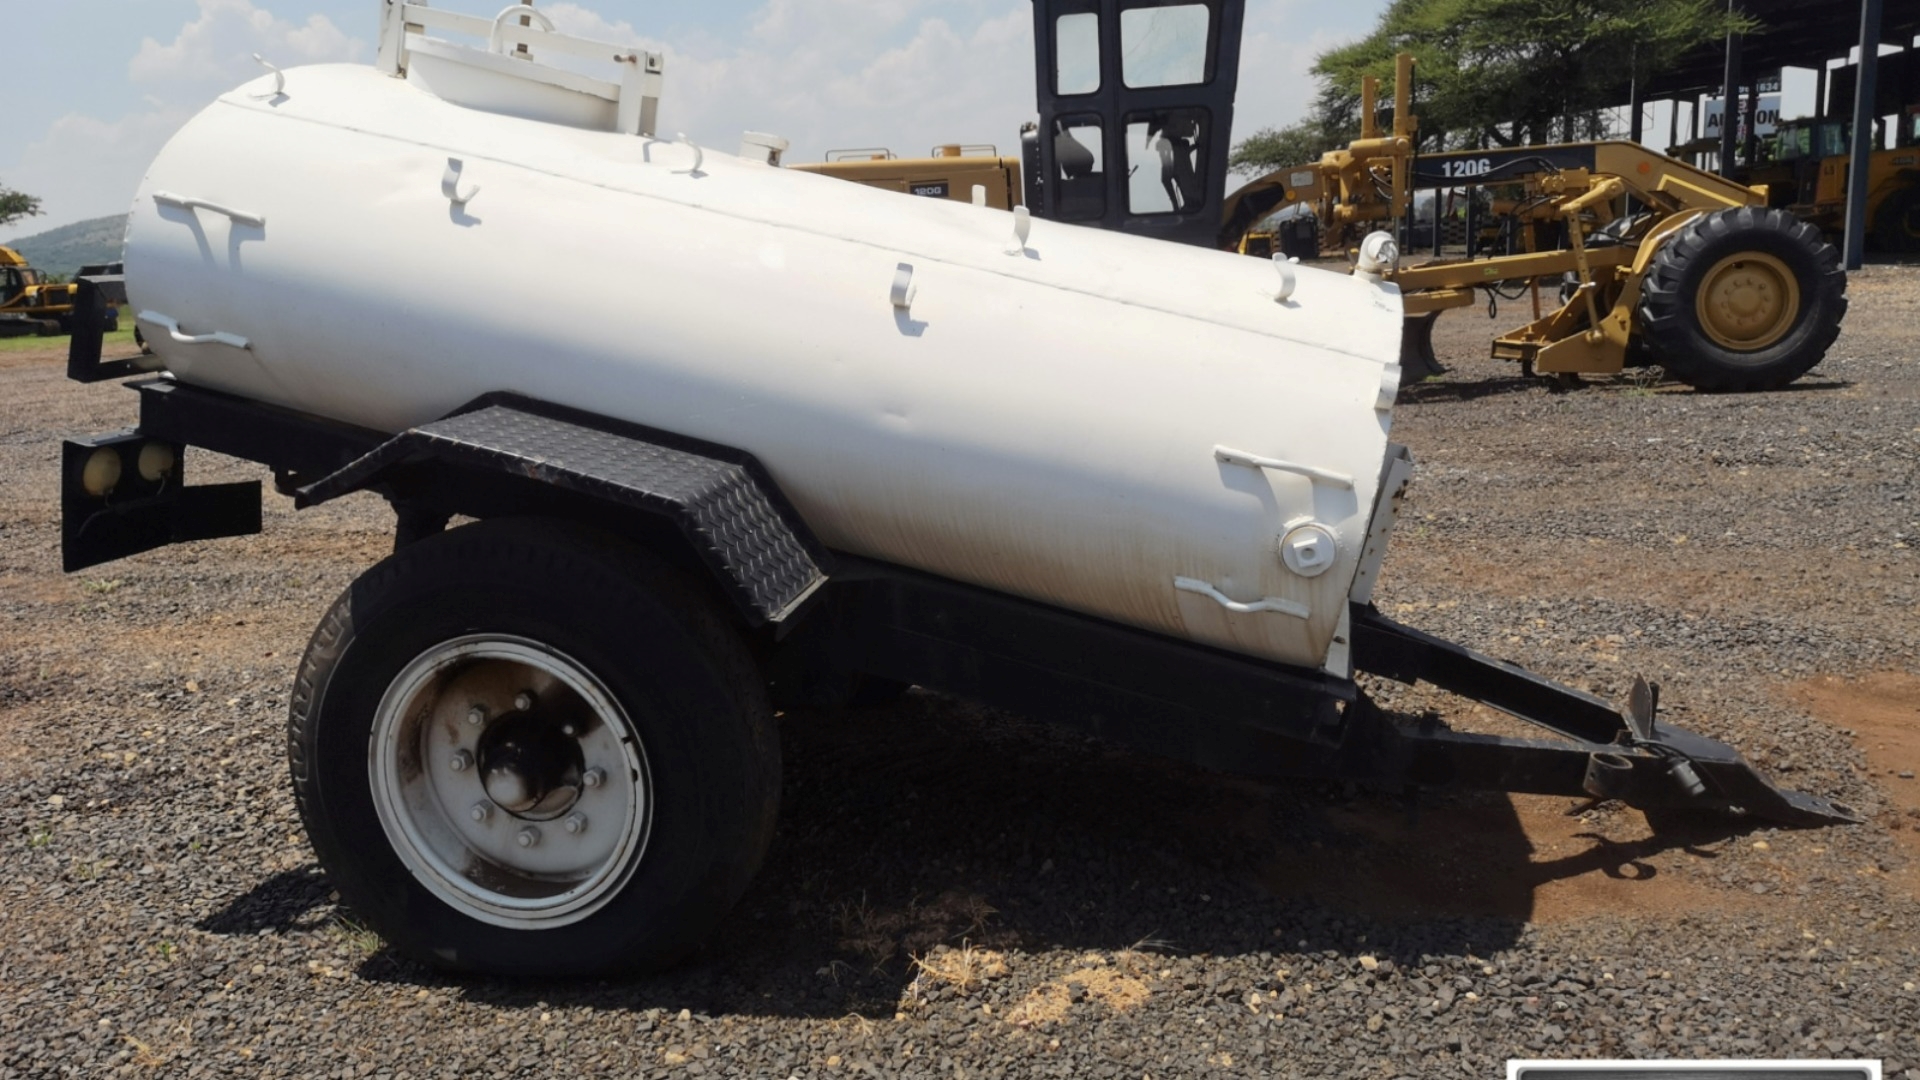 Water bowser trailer WELLFIT 2500L WATER TRAILER NO PAPERS for sale by WCT Auctions Pty Ltd  | Truck & Trailer Marketplaces